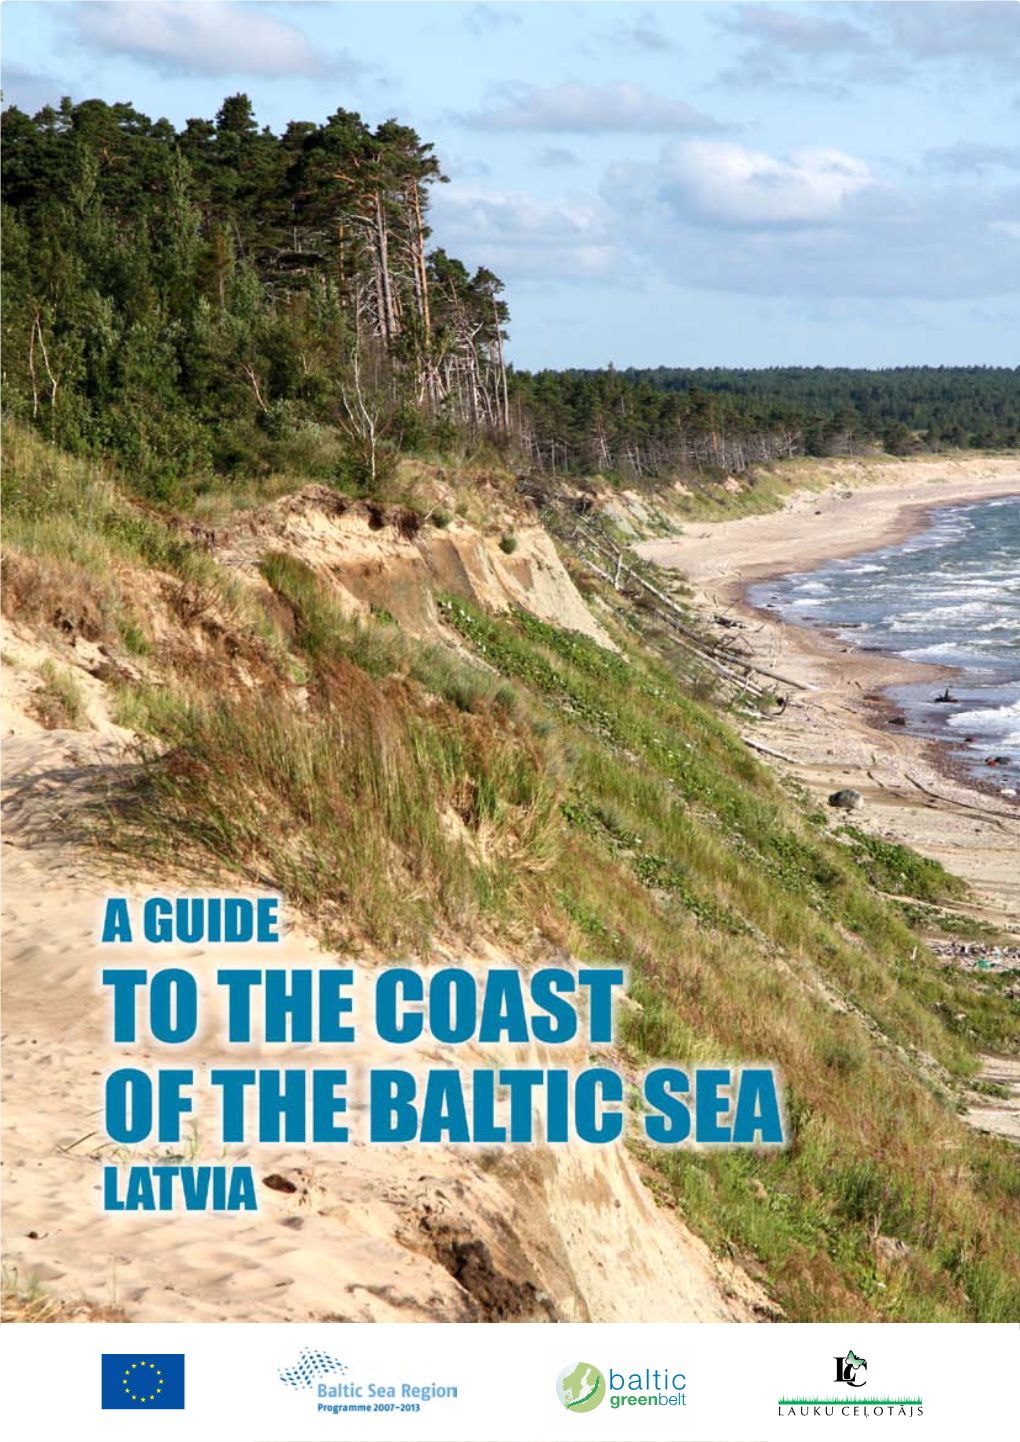 1 - "A Guide to the Coast of the Baltic Sea